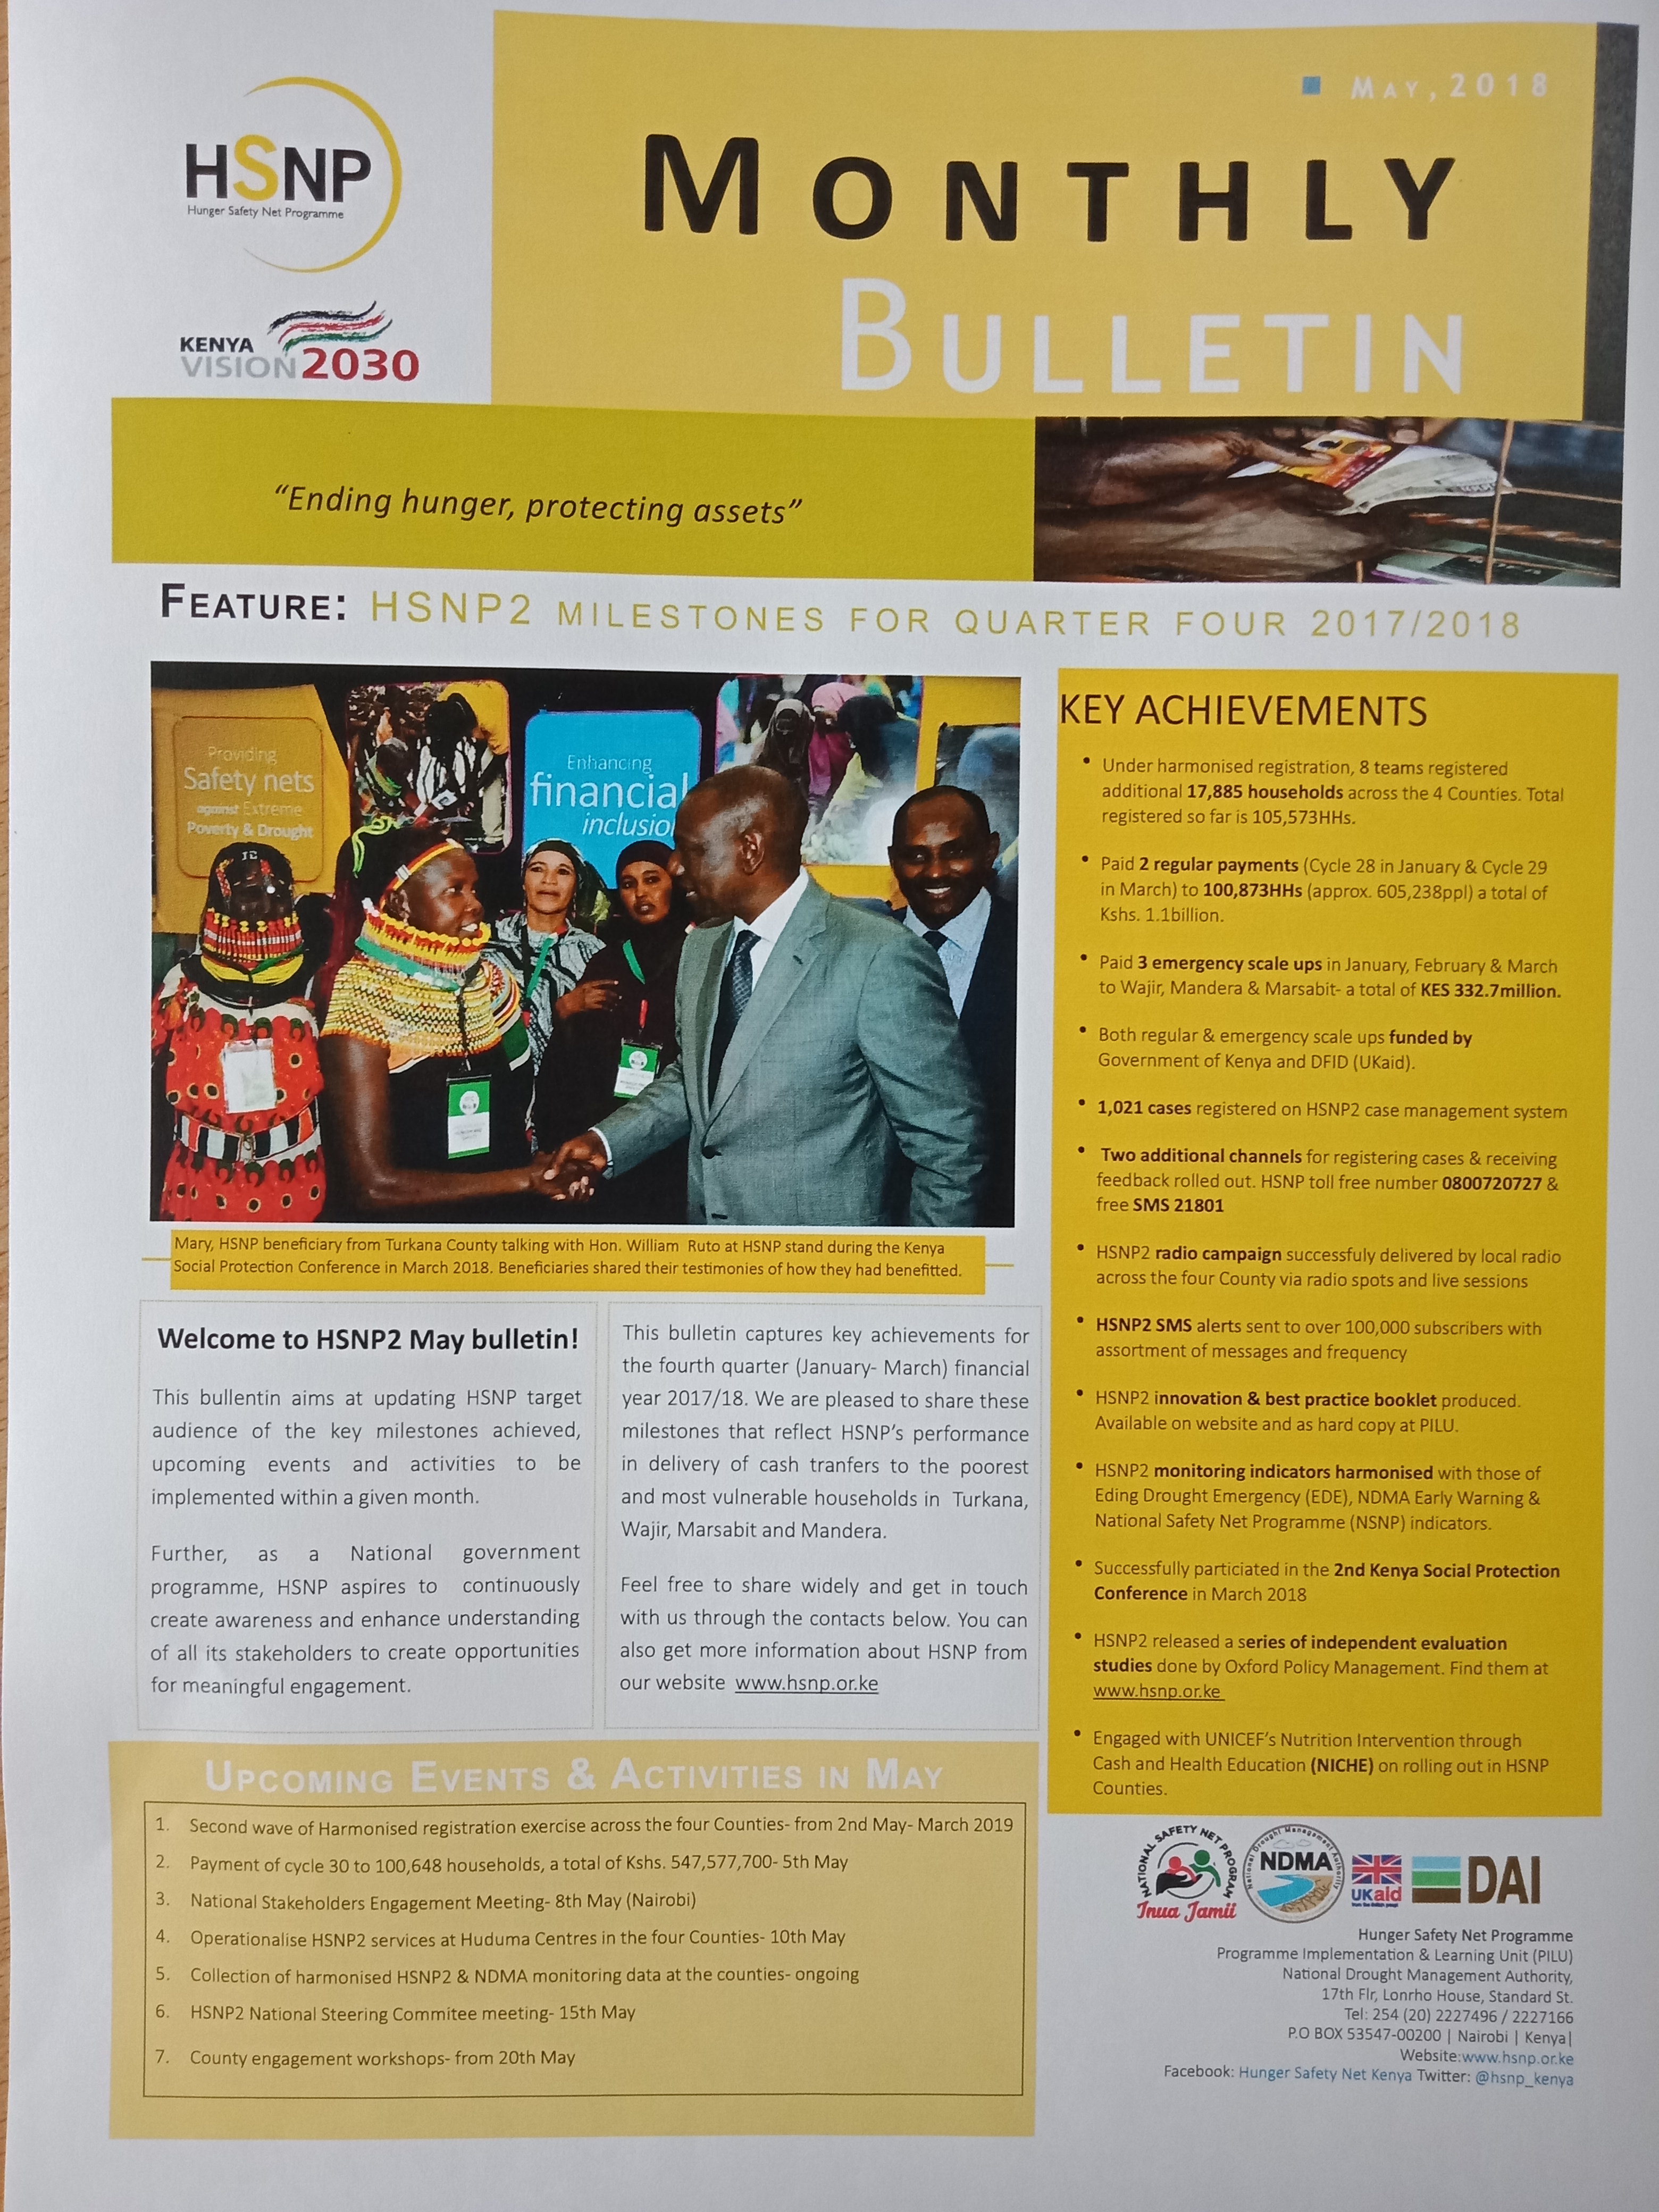 HSNP2 Monthly Bulletin for May 2018